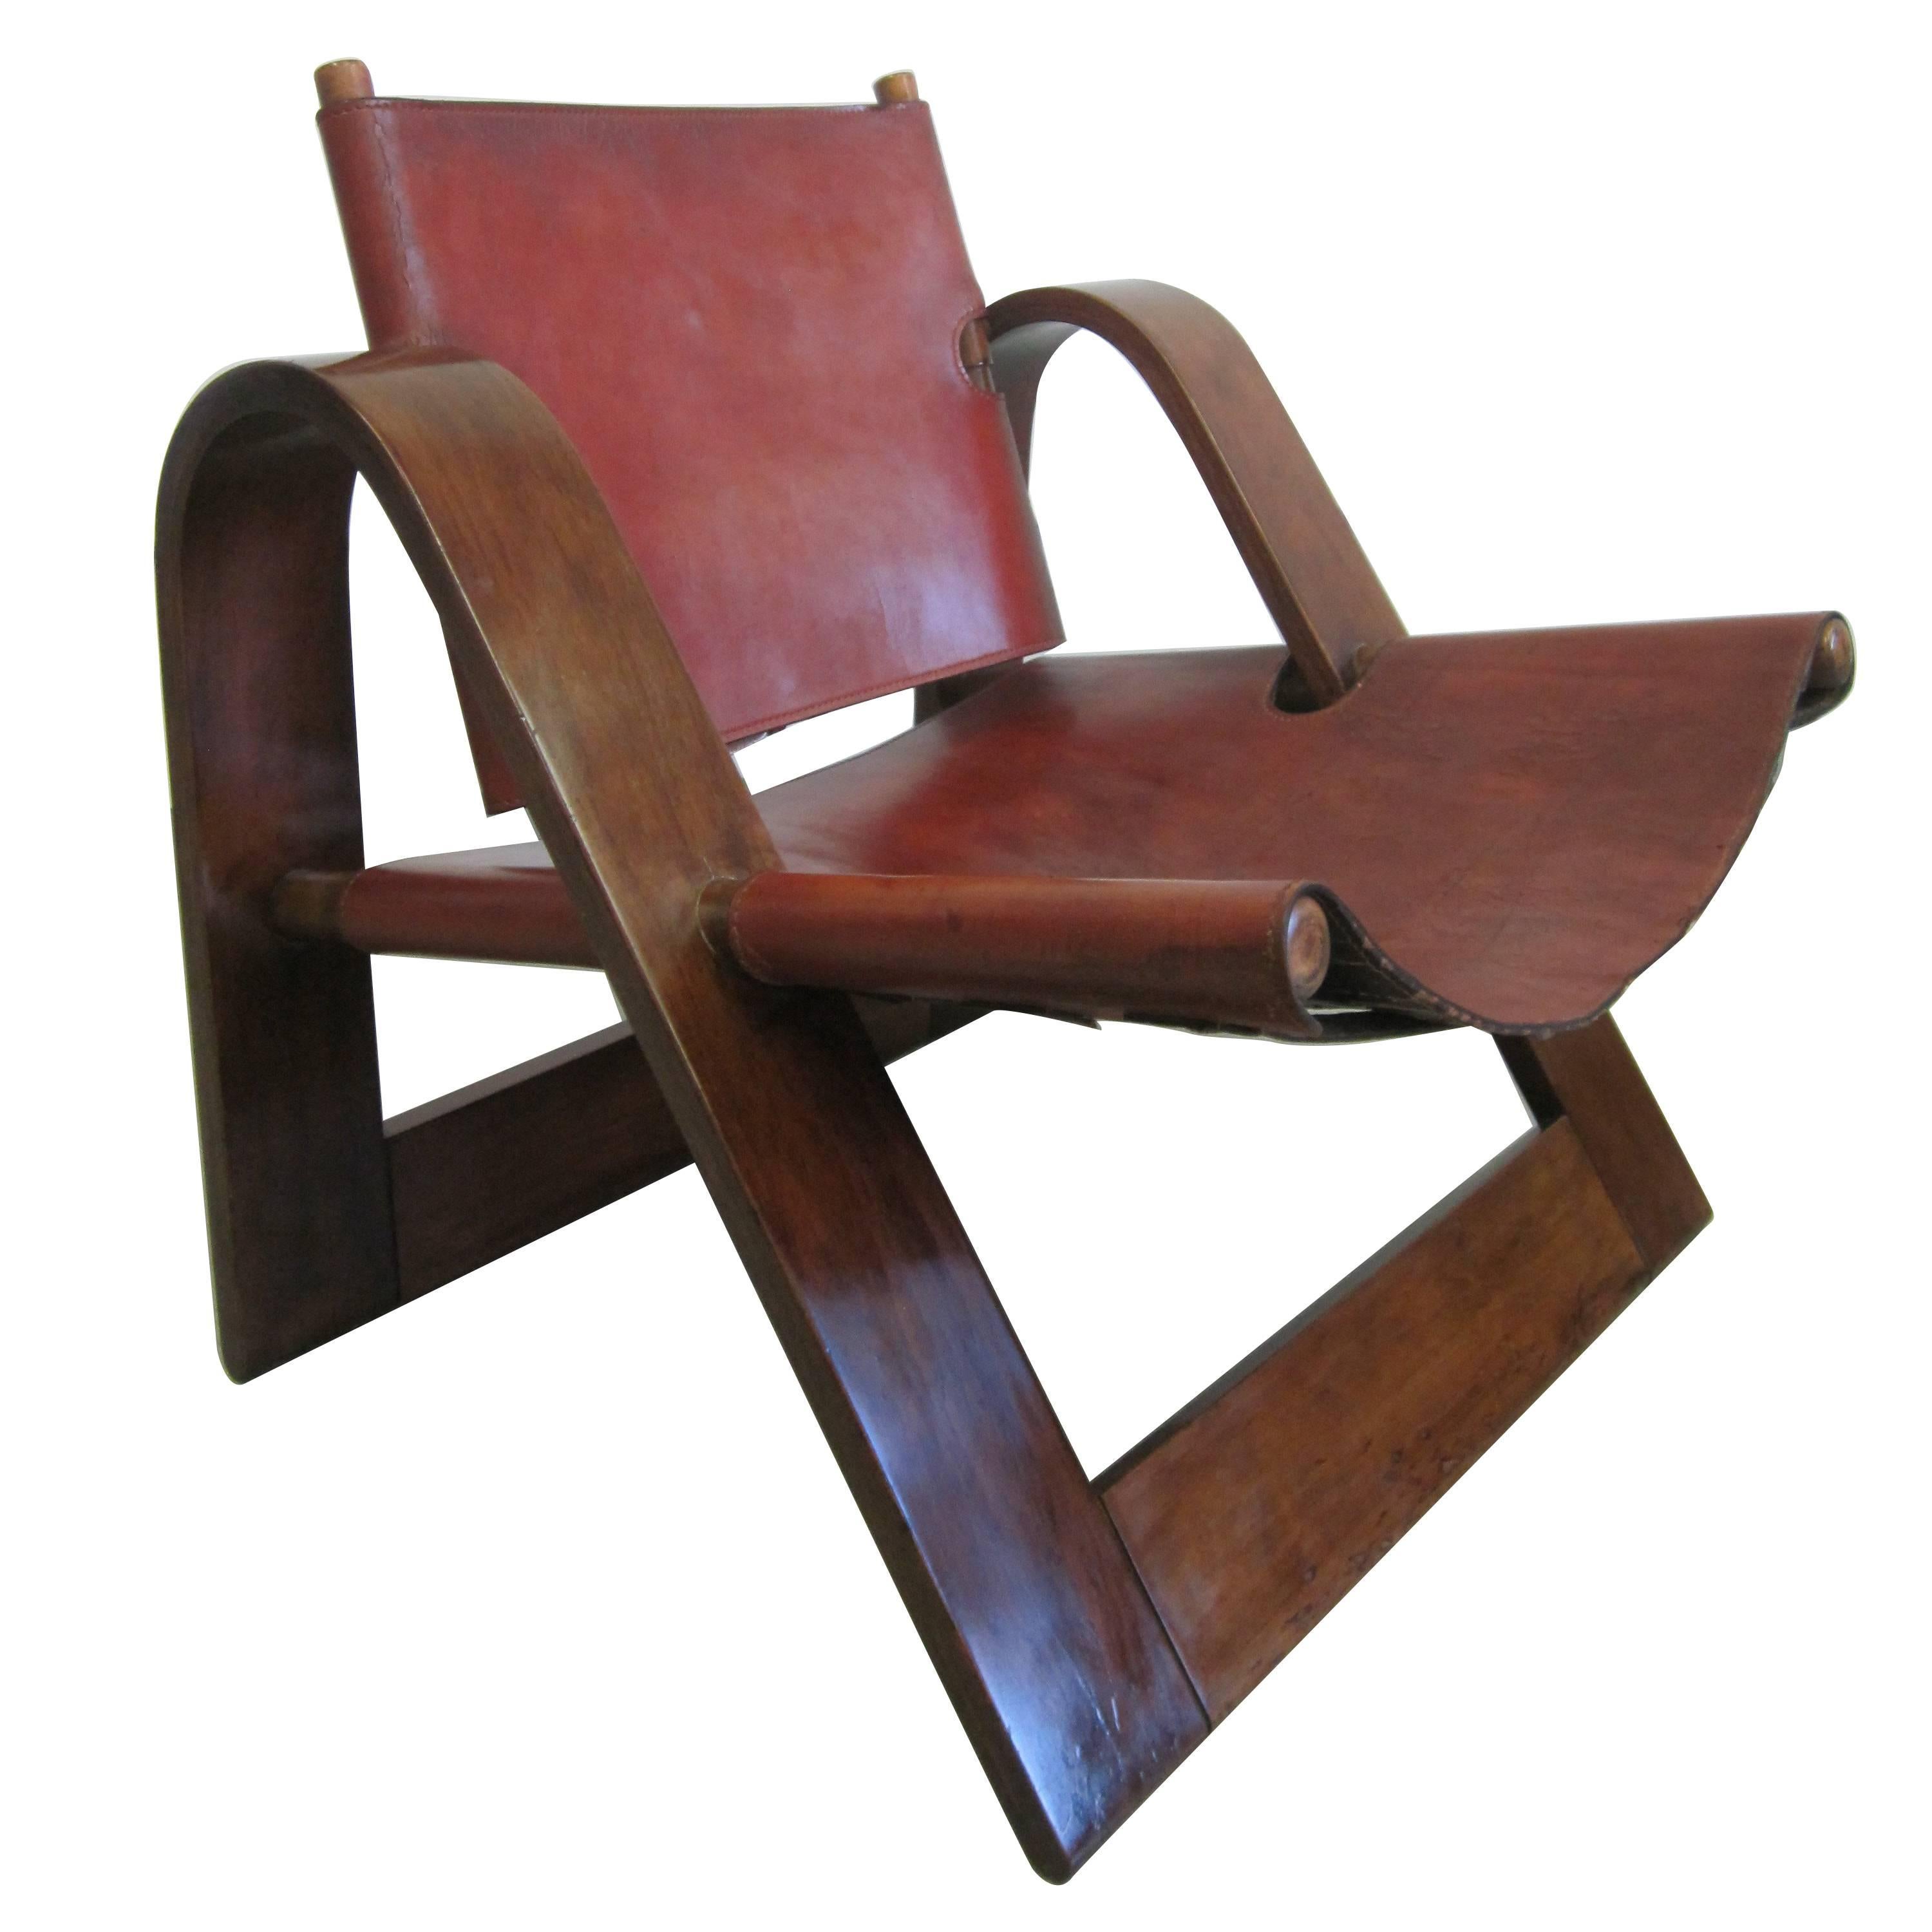 Danish Mid-Century Modern Leather Strap Chair Attributed to Borge Mogensen